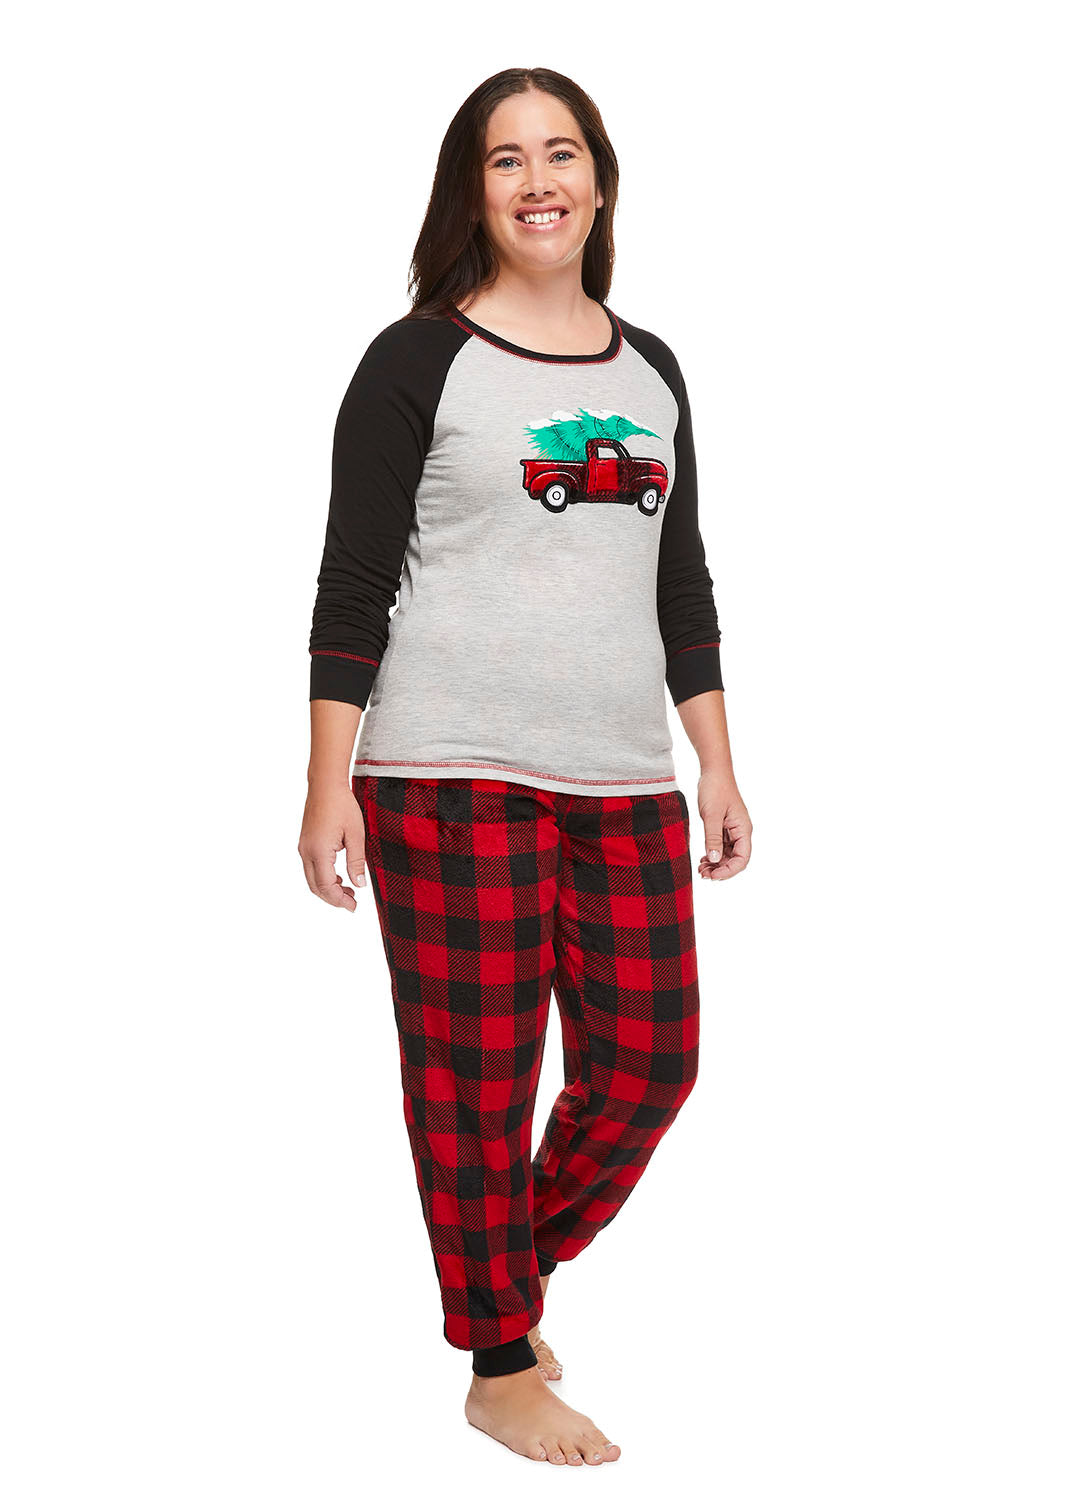 Woman smiling and wearing Red Truck Family Sleepwear Pajama Set